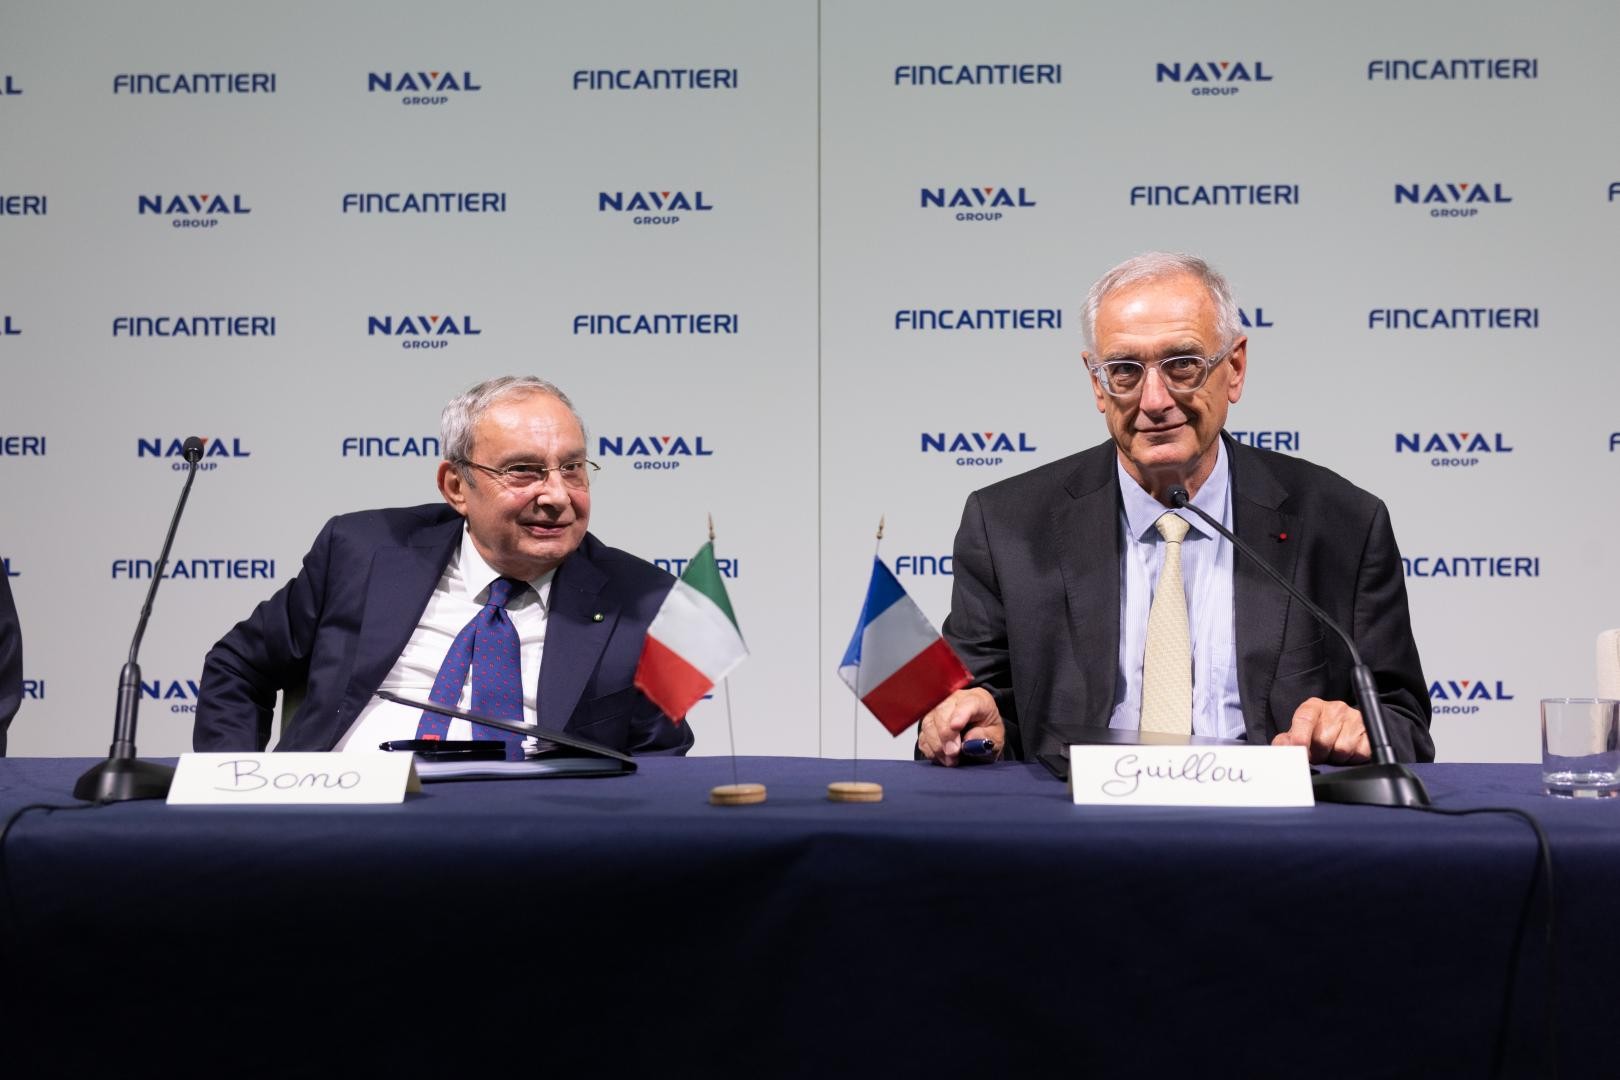 Naval Group and Fincantieri's press release